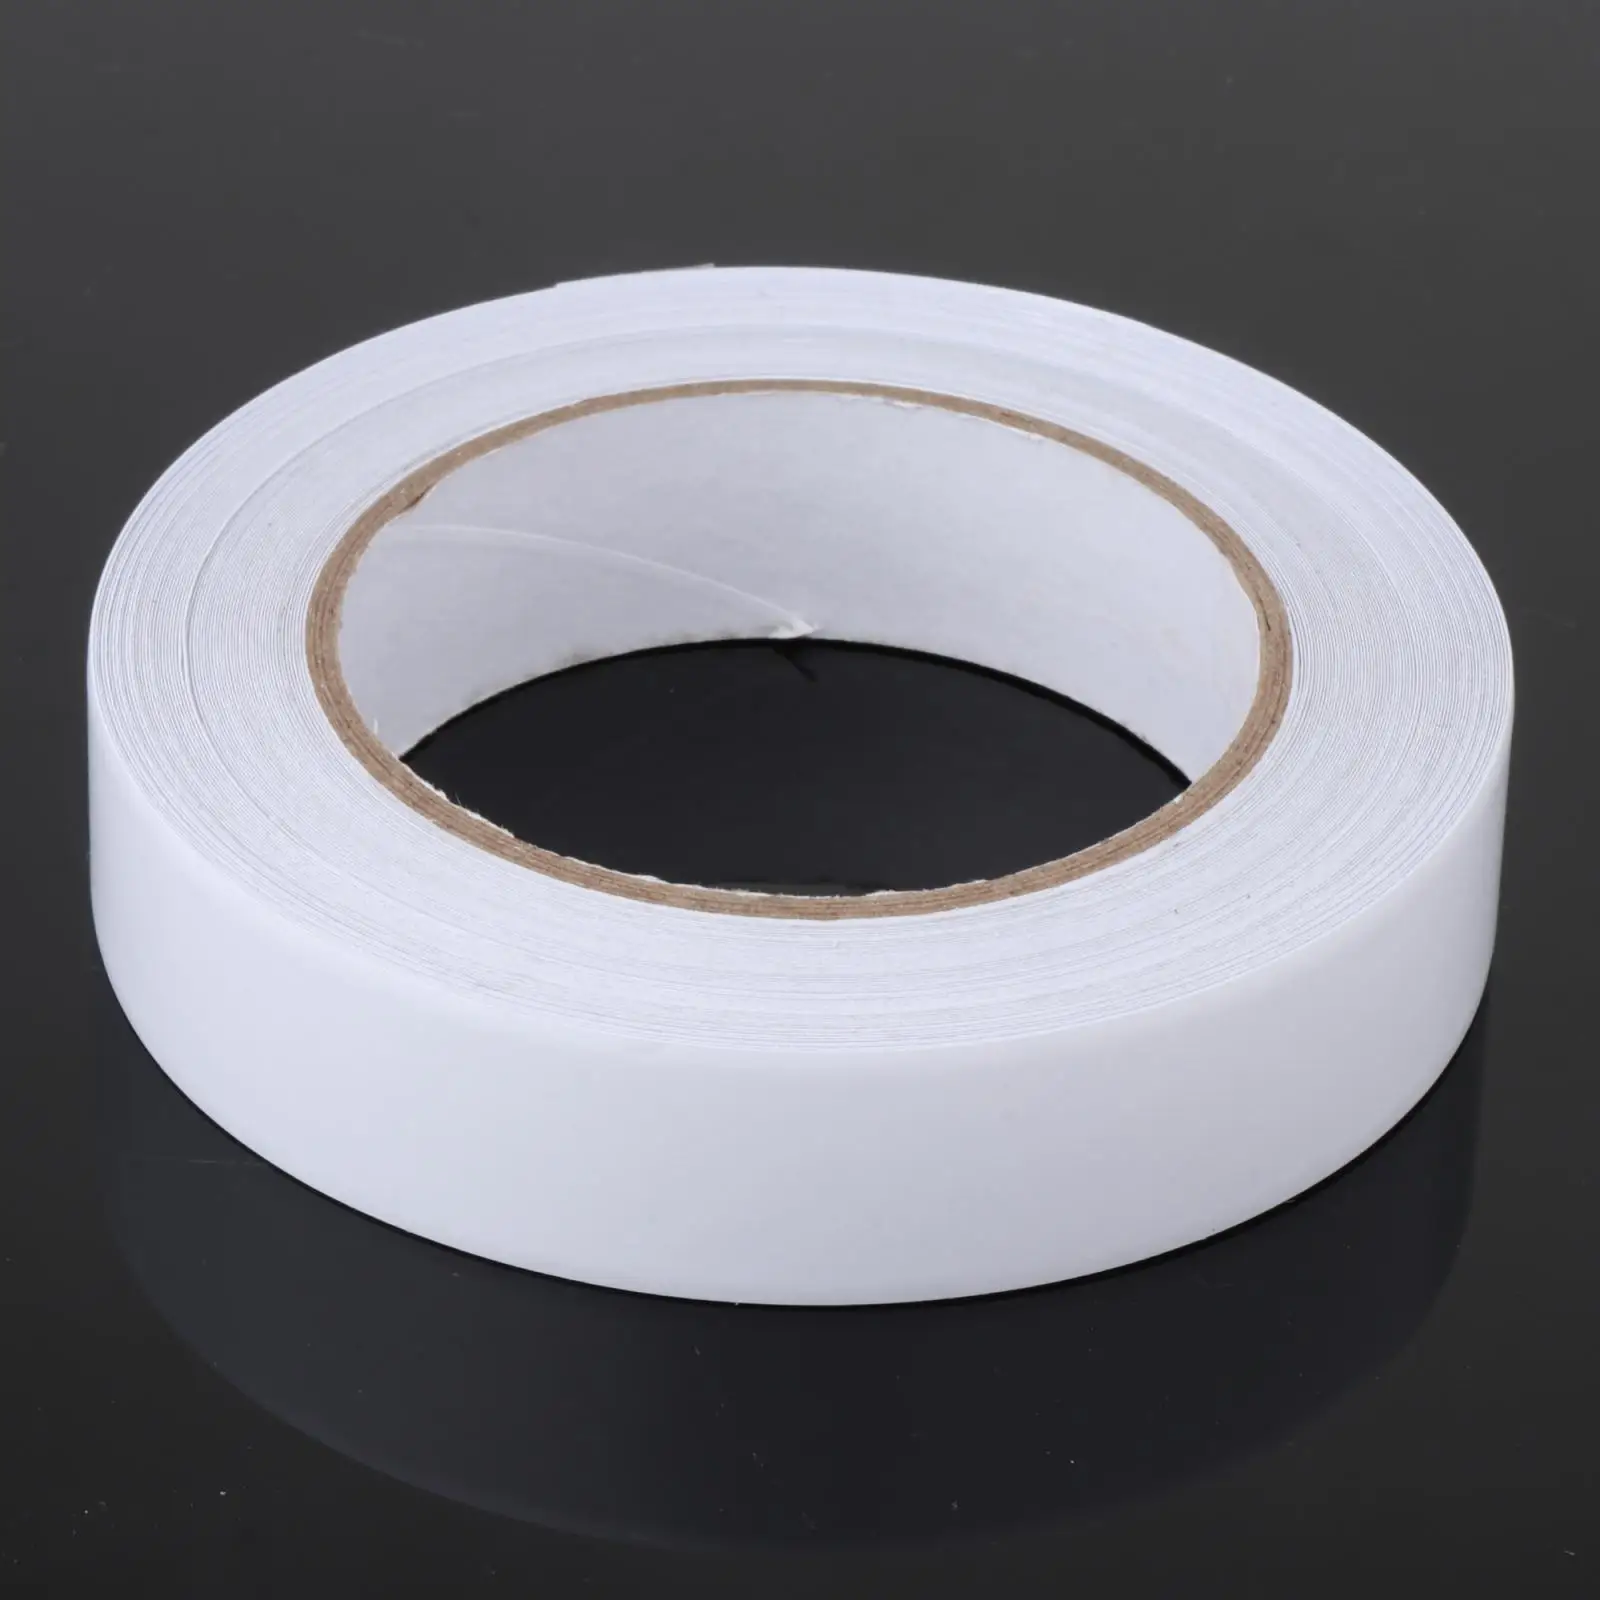 Swimming Rings Repair Tape Tent Durable Waterproof Awning Swimming Pool Patch for Boat Air Mattress Trampoline Outdoor Air Bed